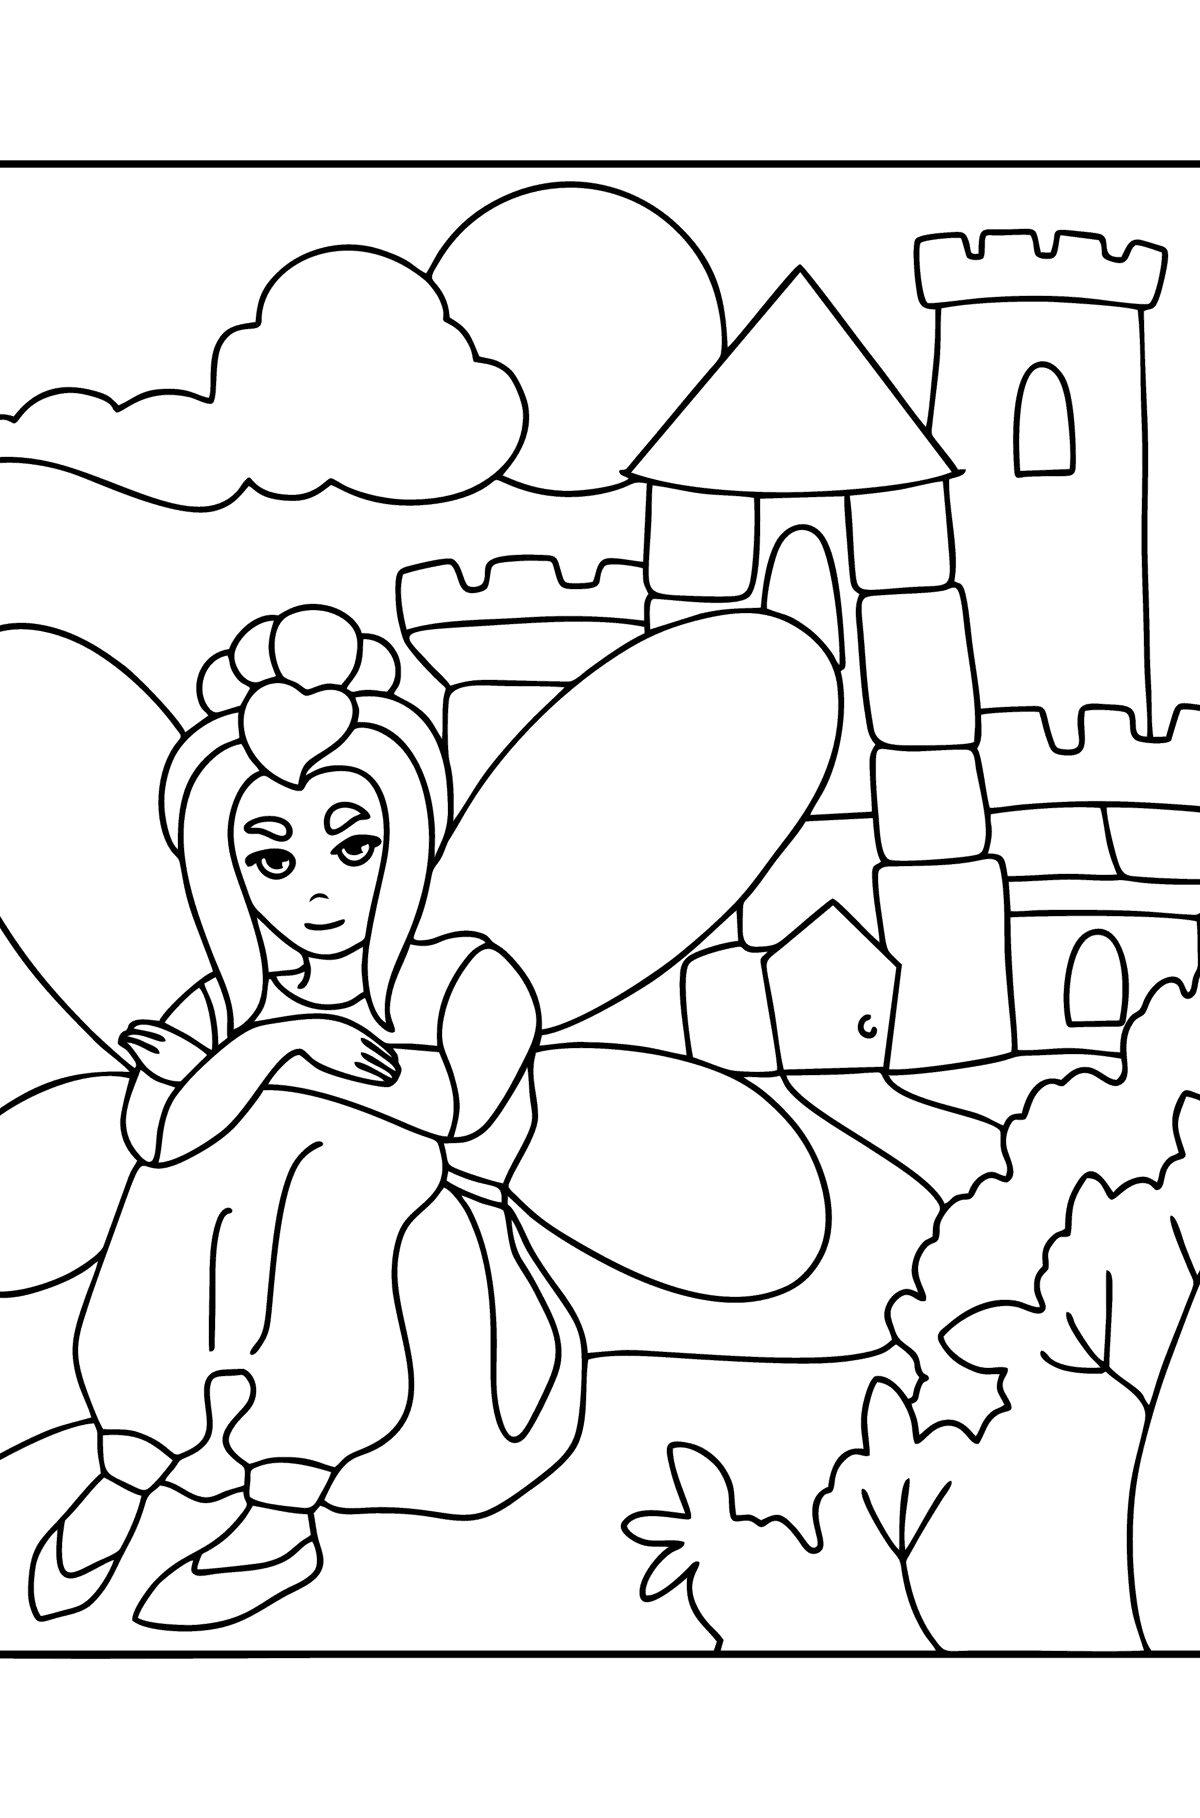 Fairy at the castle coloring page - Coloring Pages for Kids